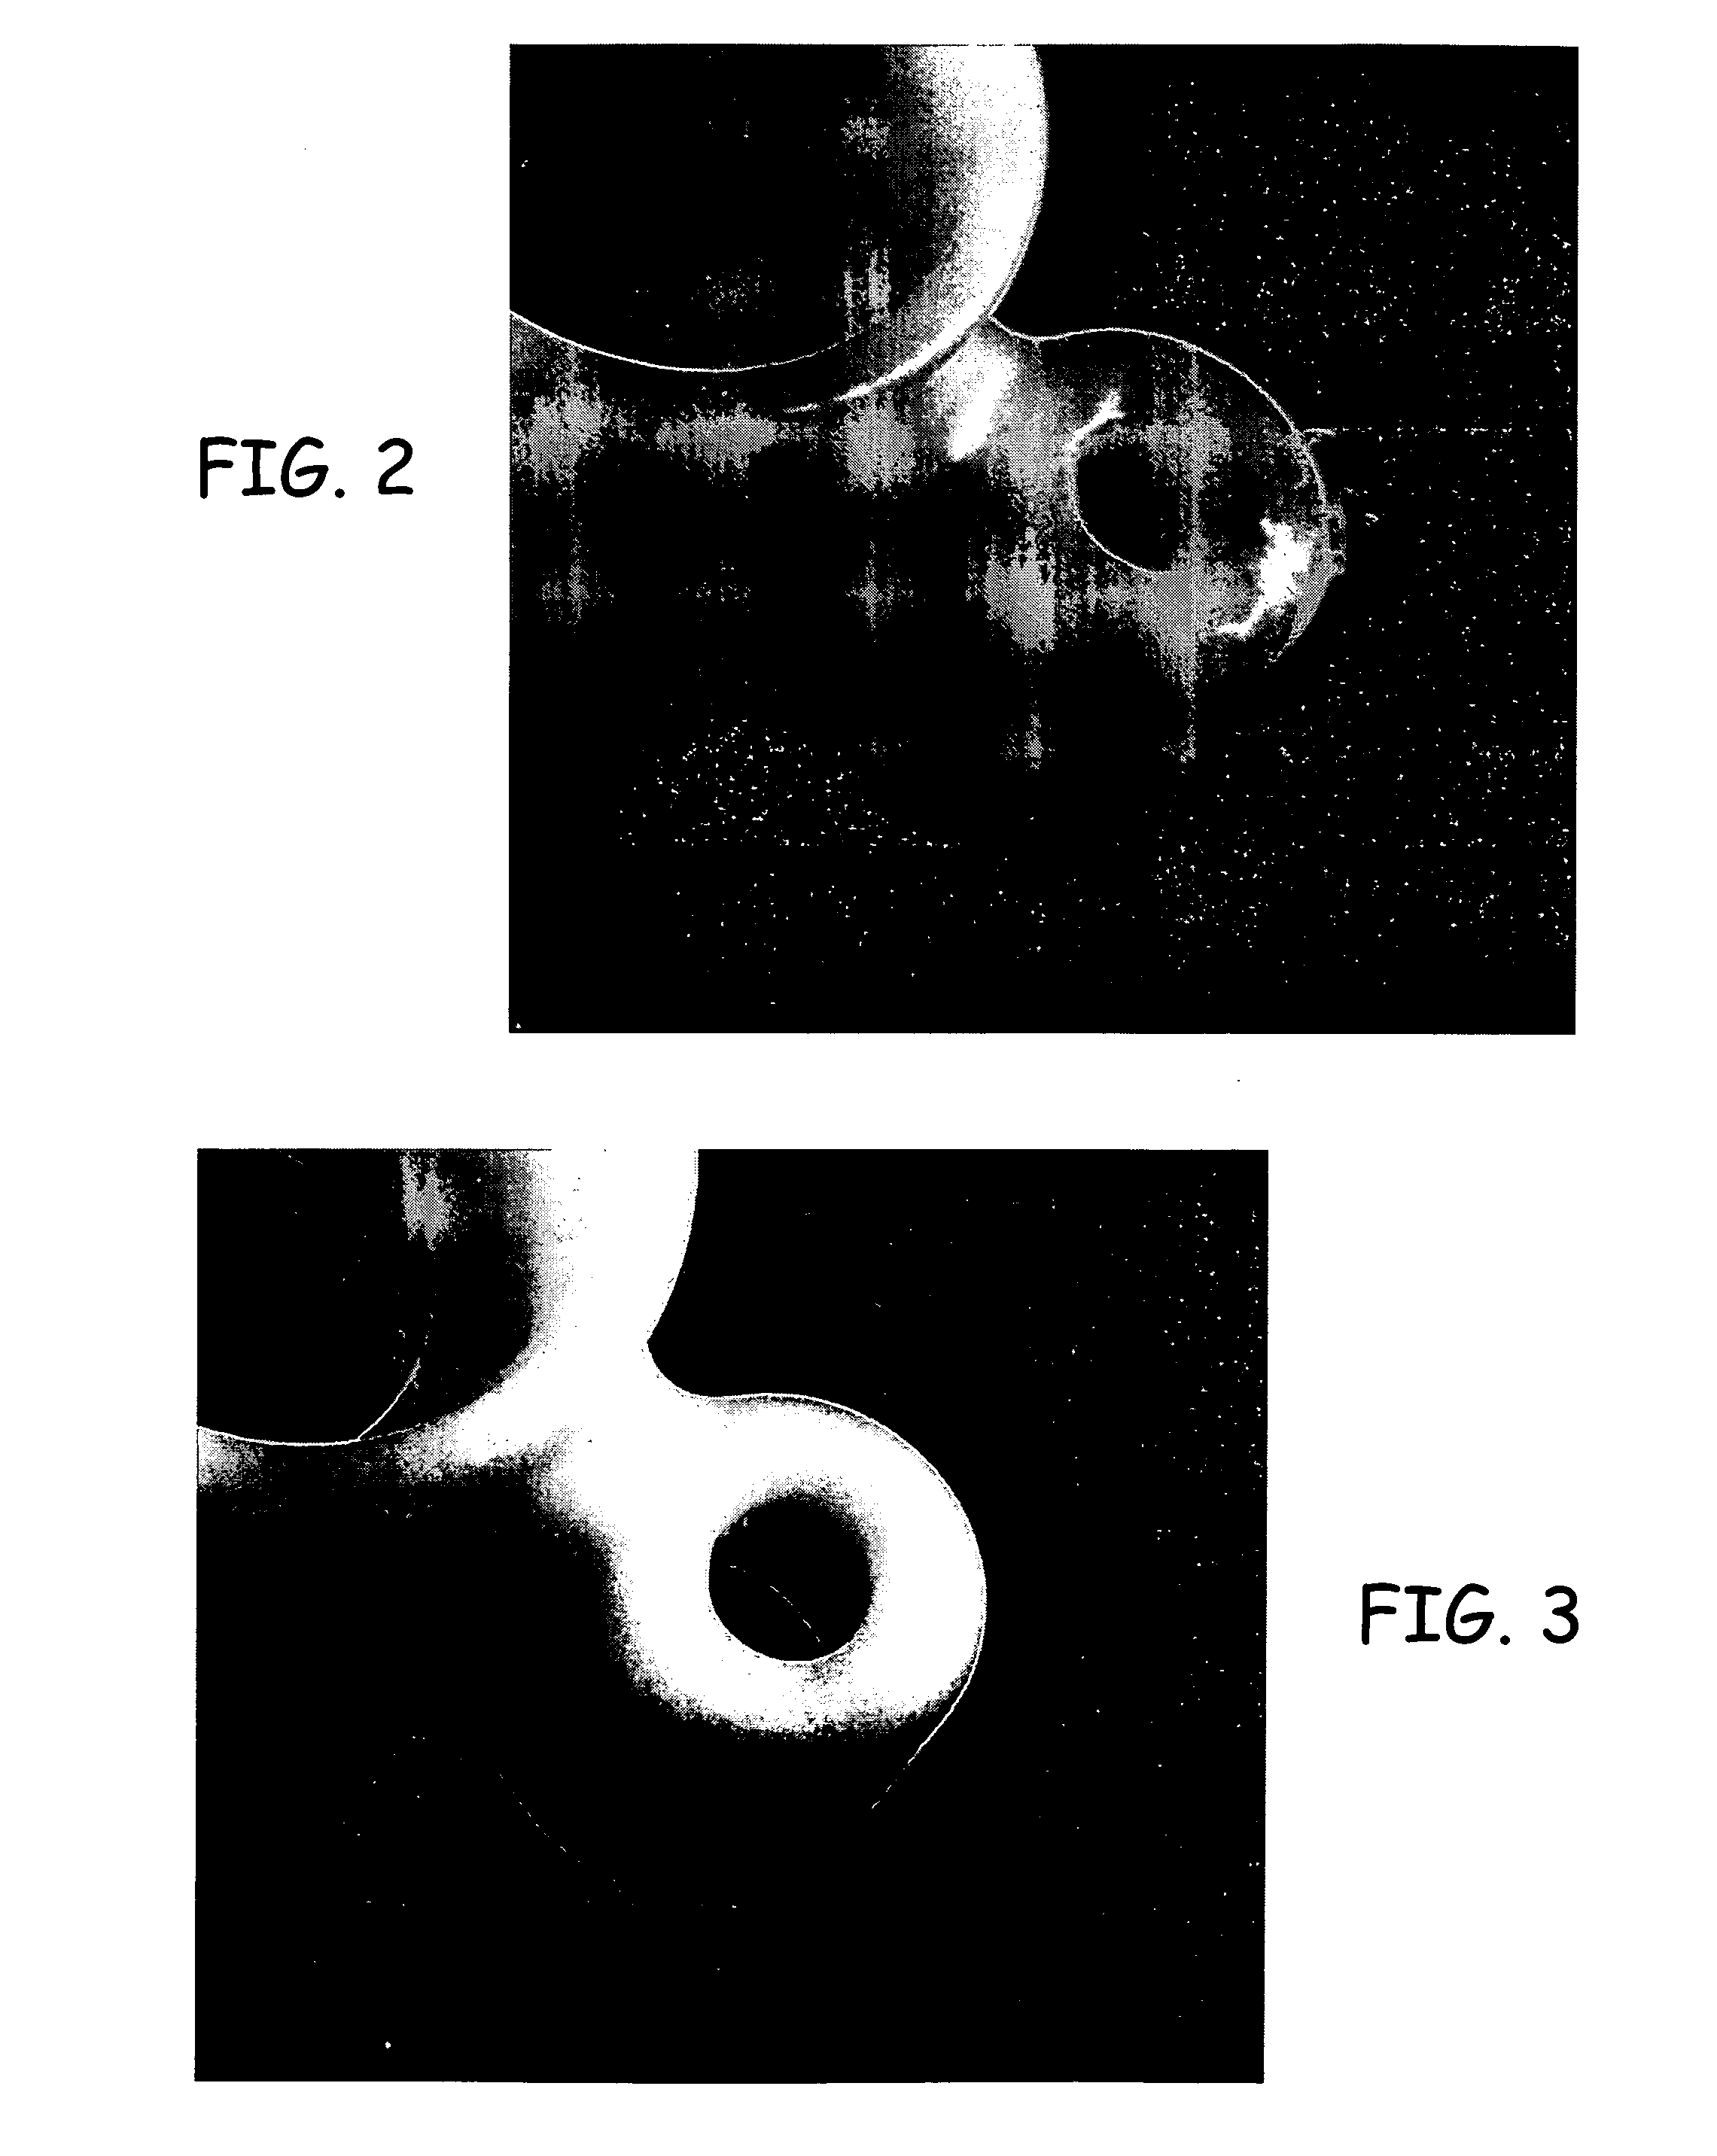 Surface-treatment method for rapid-manufactured three-dimensional objects